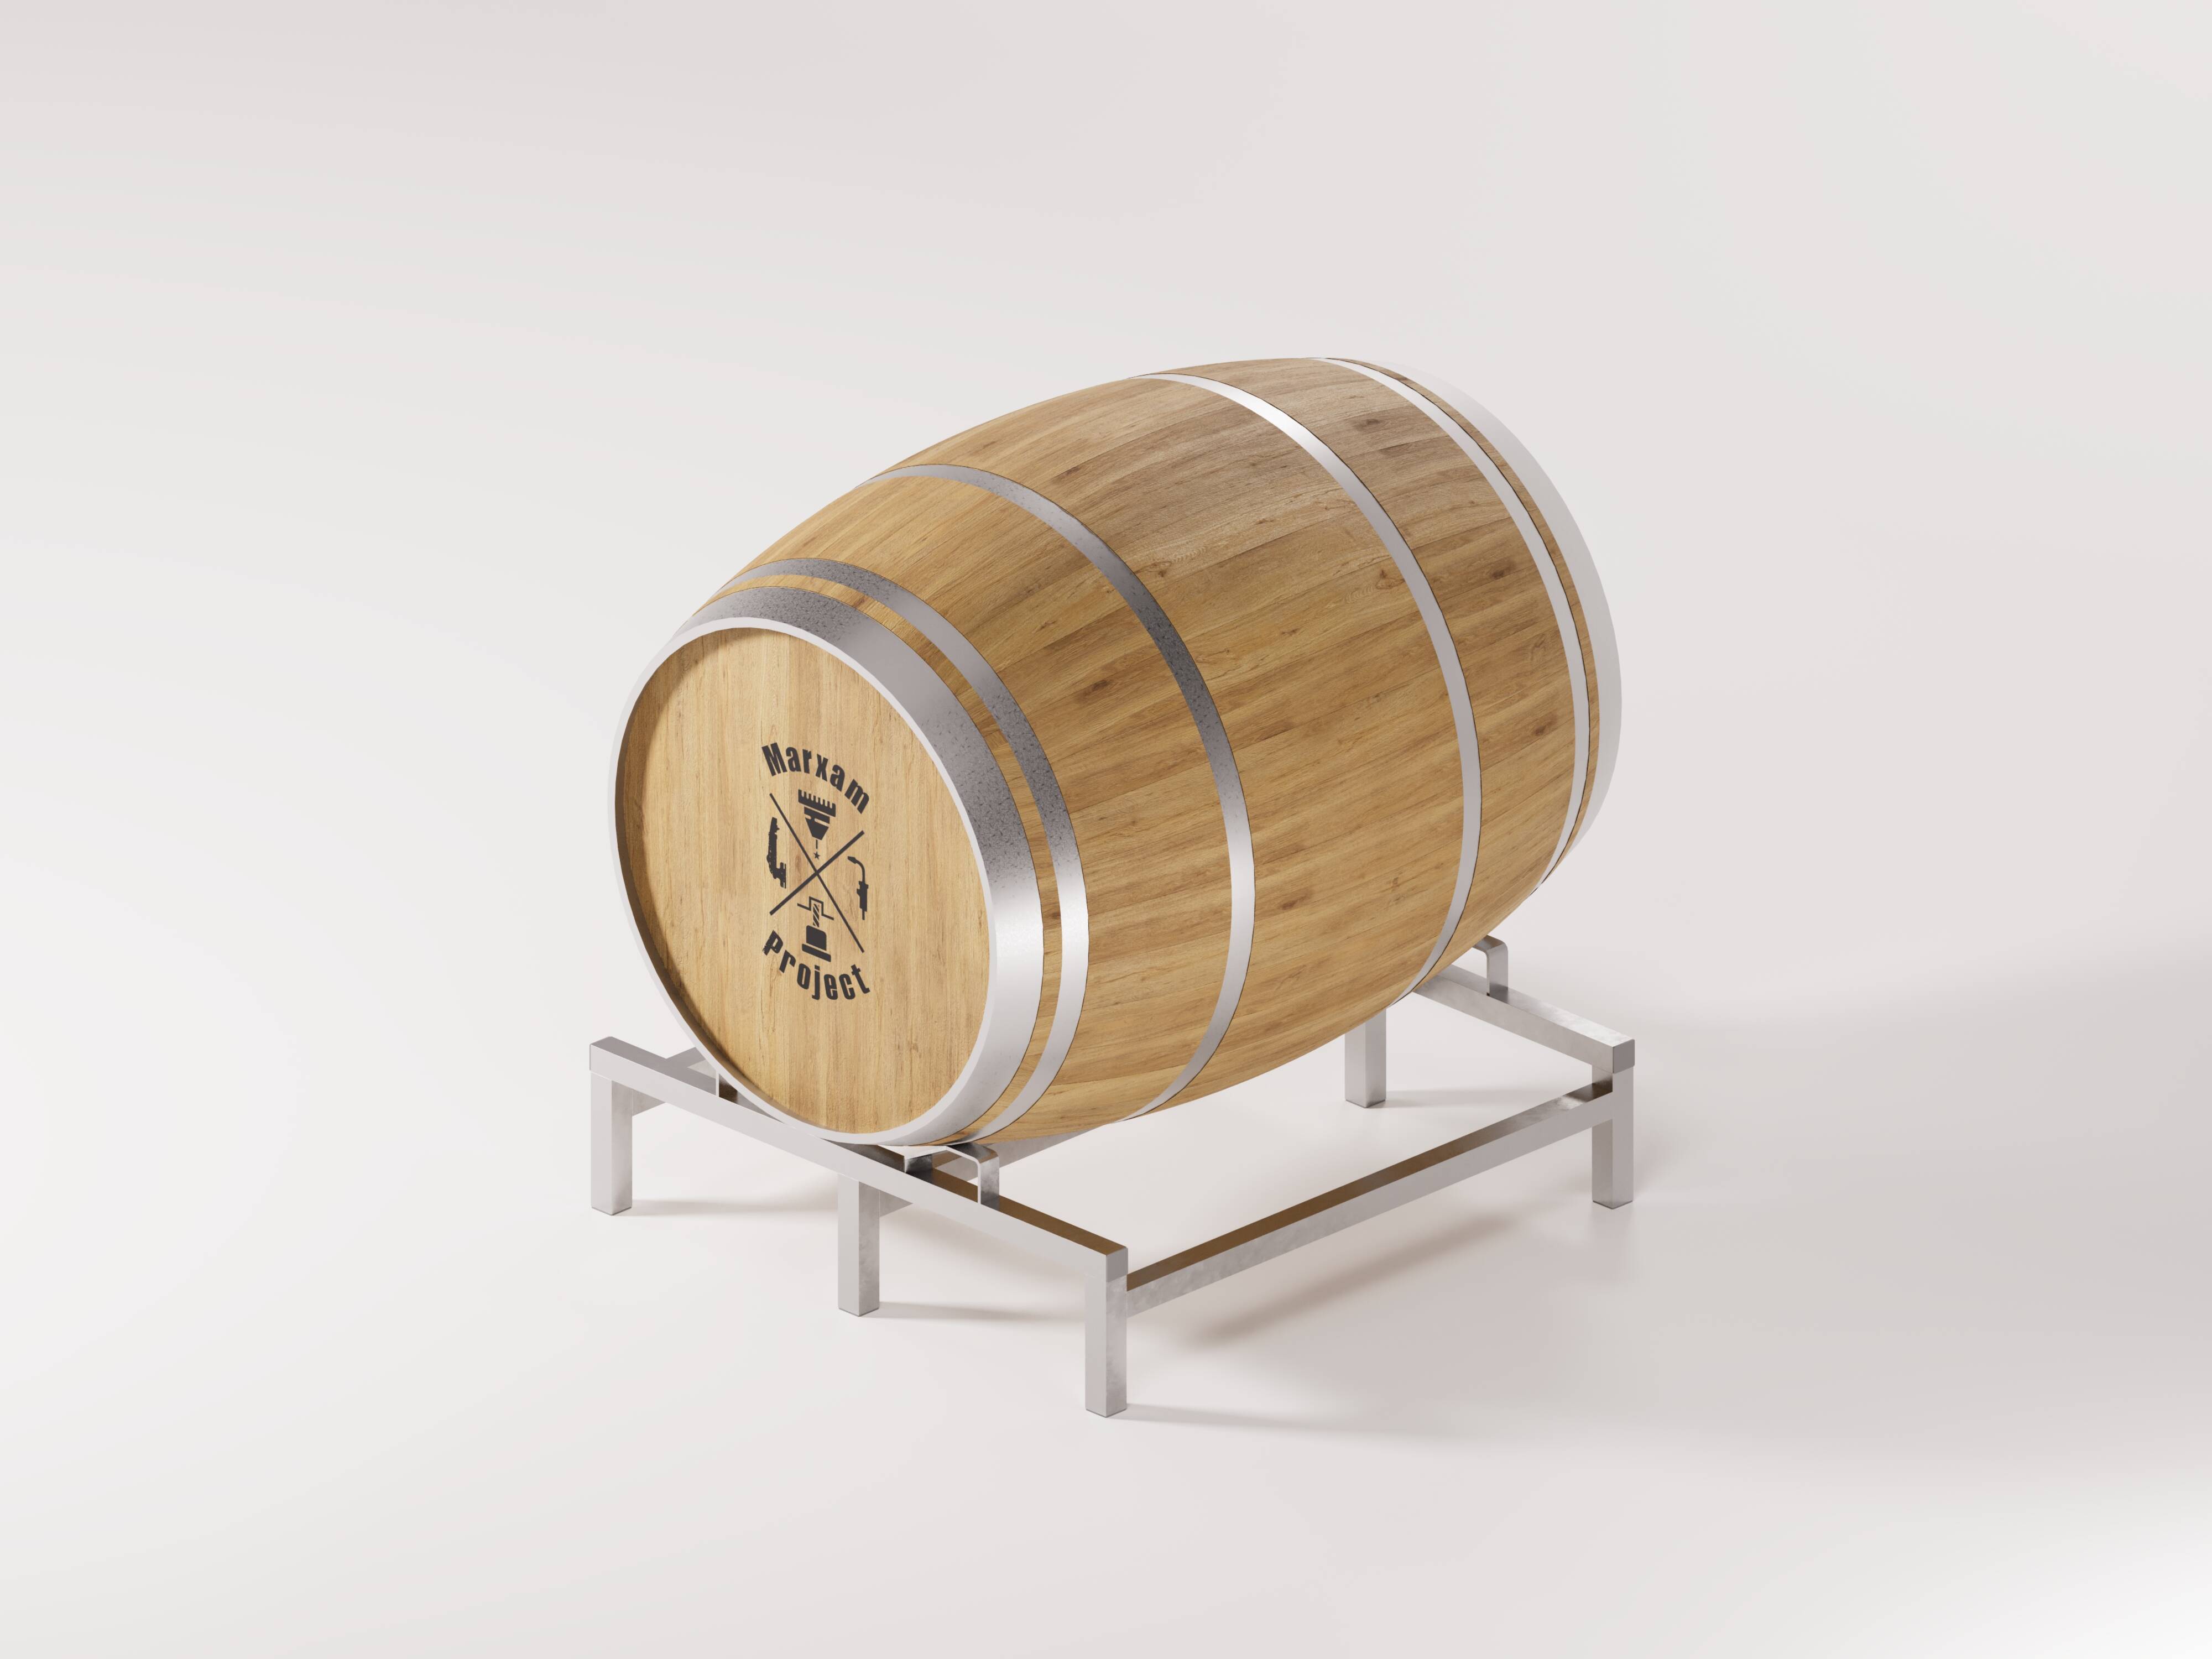 A wooden barrel on a rack with a metal base is depicted in the image. The single barrel rack, designed for storing one barrel, showcases a traditional wooden barrel placed securely on a sturdy metal rack.